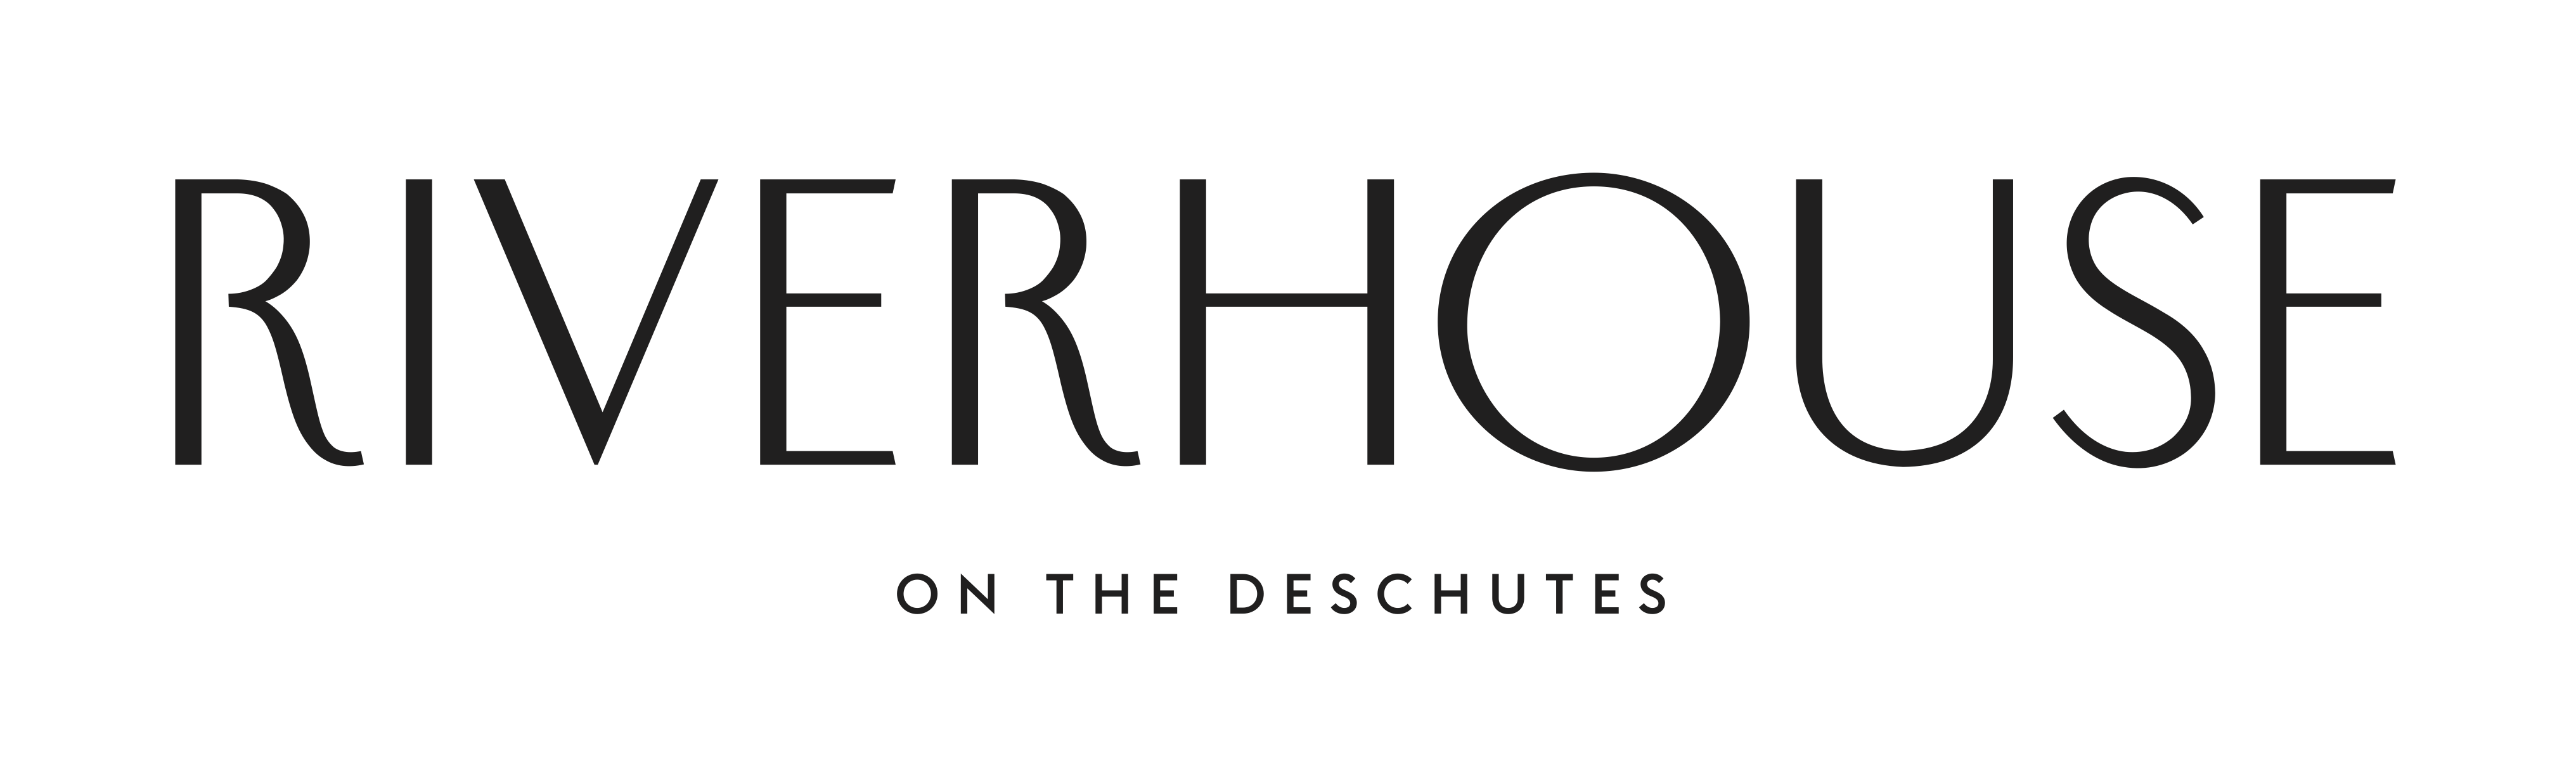 River House Logo - Riverhouse on the Deschutes, Bend, OR Jobs | Hospitality Online